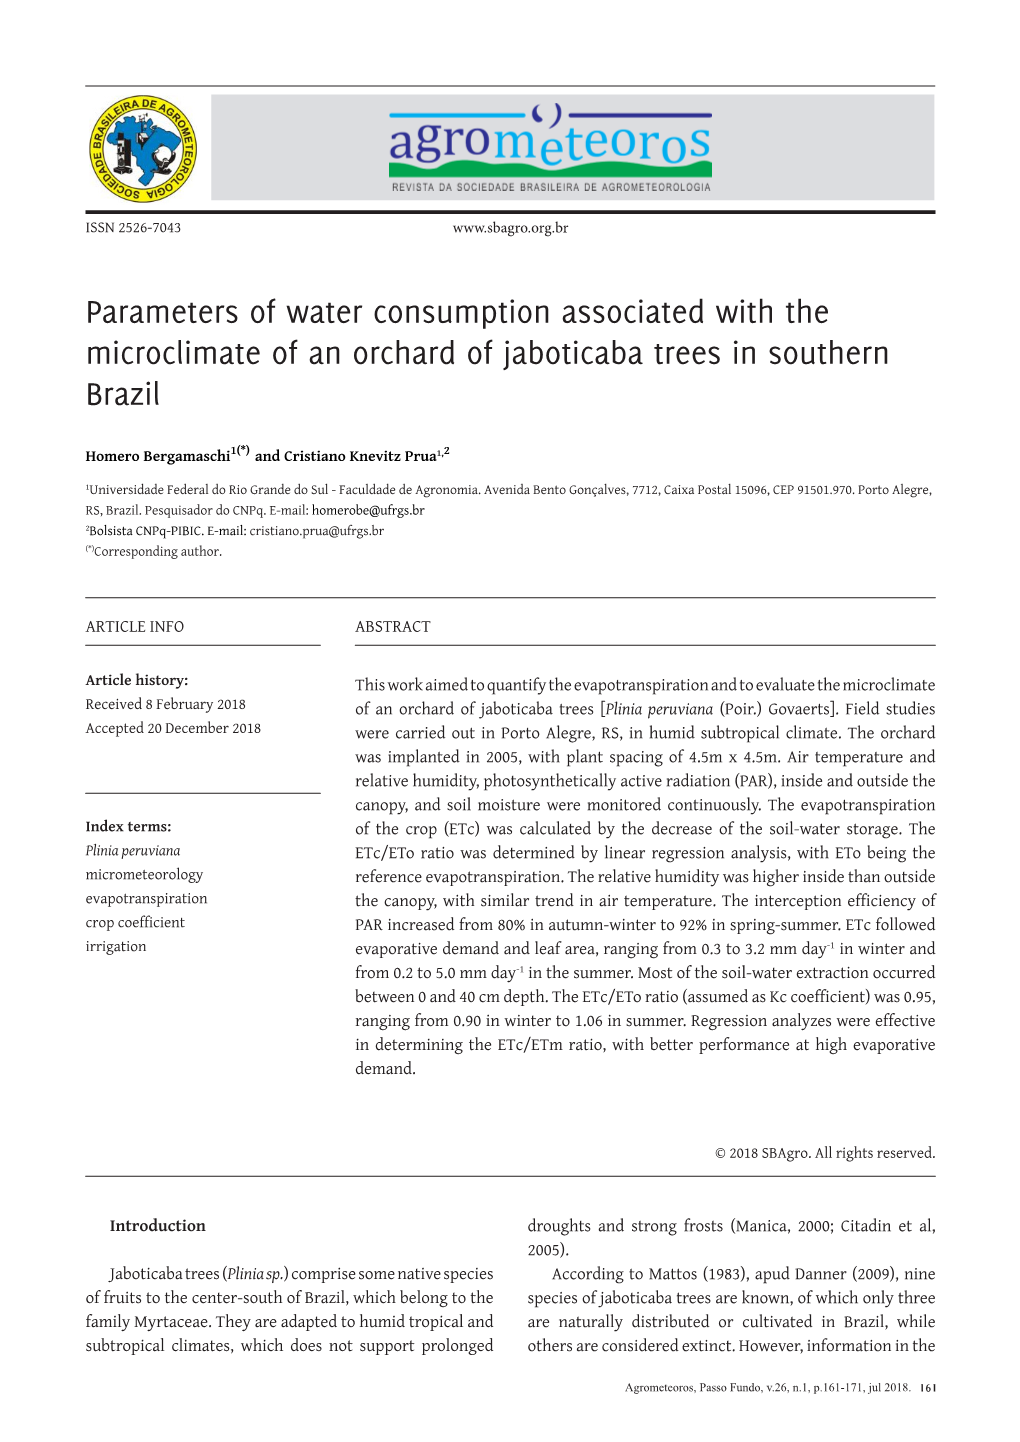 Parameters of Water Consumption Associated with the Microclimate of an Orchard of Jaboticaba Trees in Southern Brazil